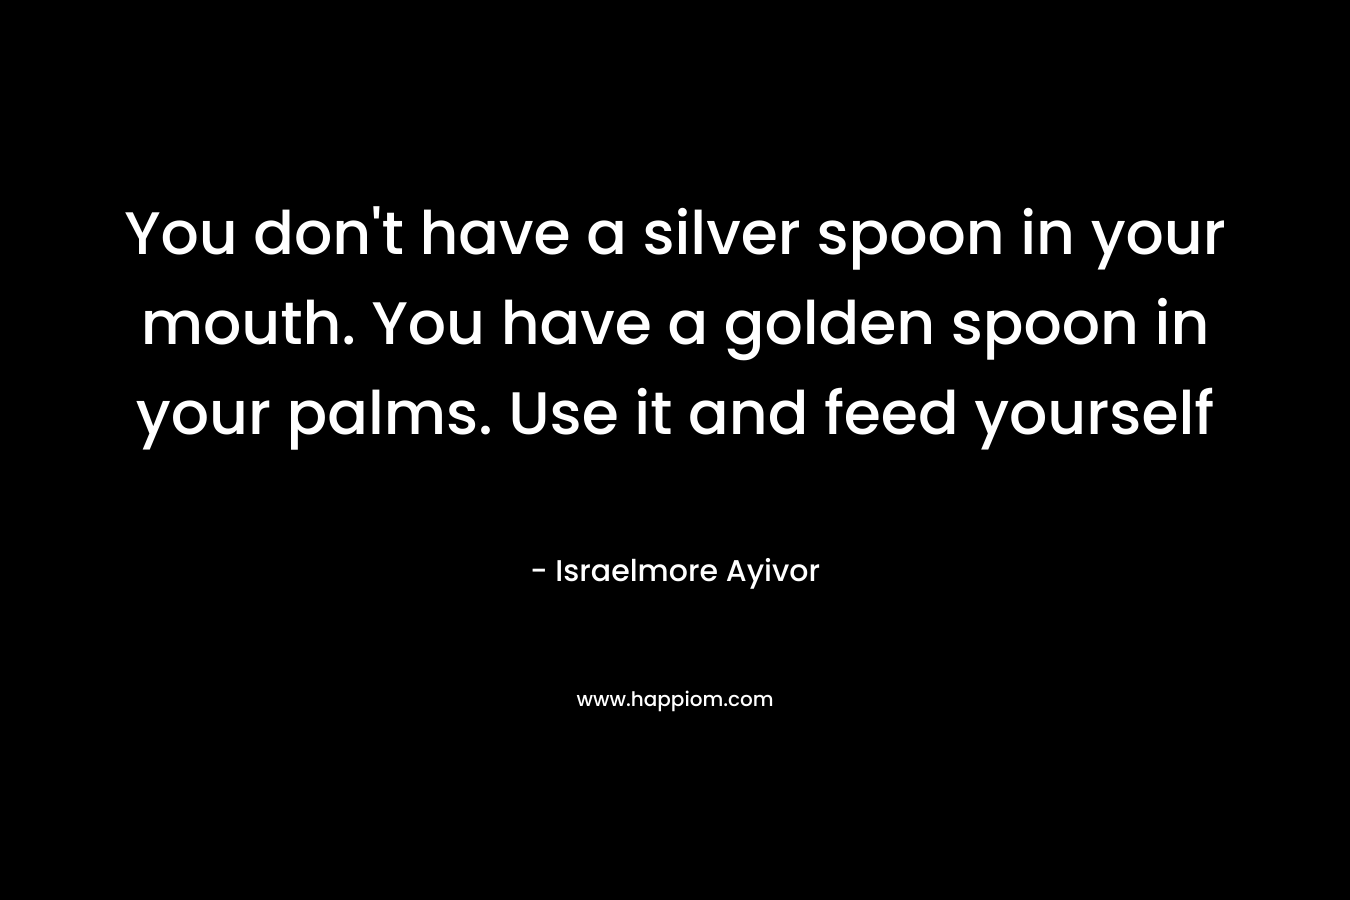 You don’t have a silver spoon in your mouth. You have a golden spoon in your palms. Use it and feed yourself – Israelmore Ayivor